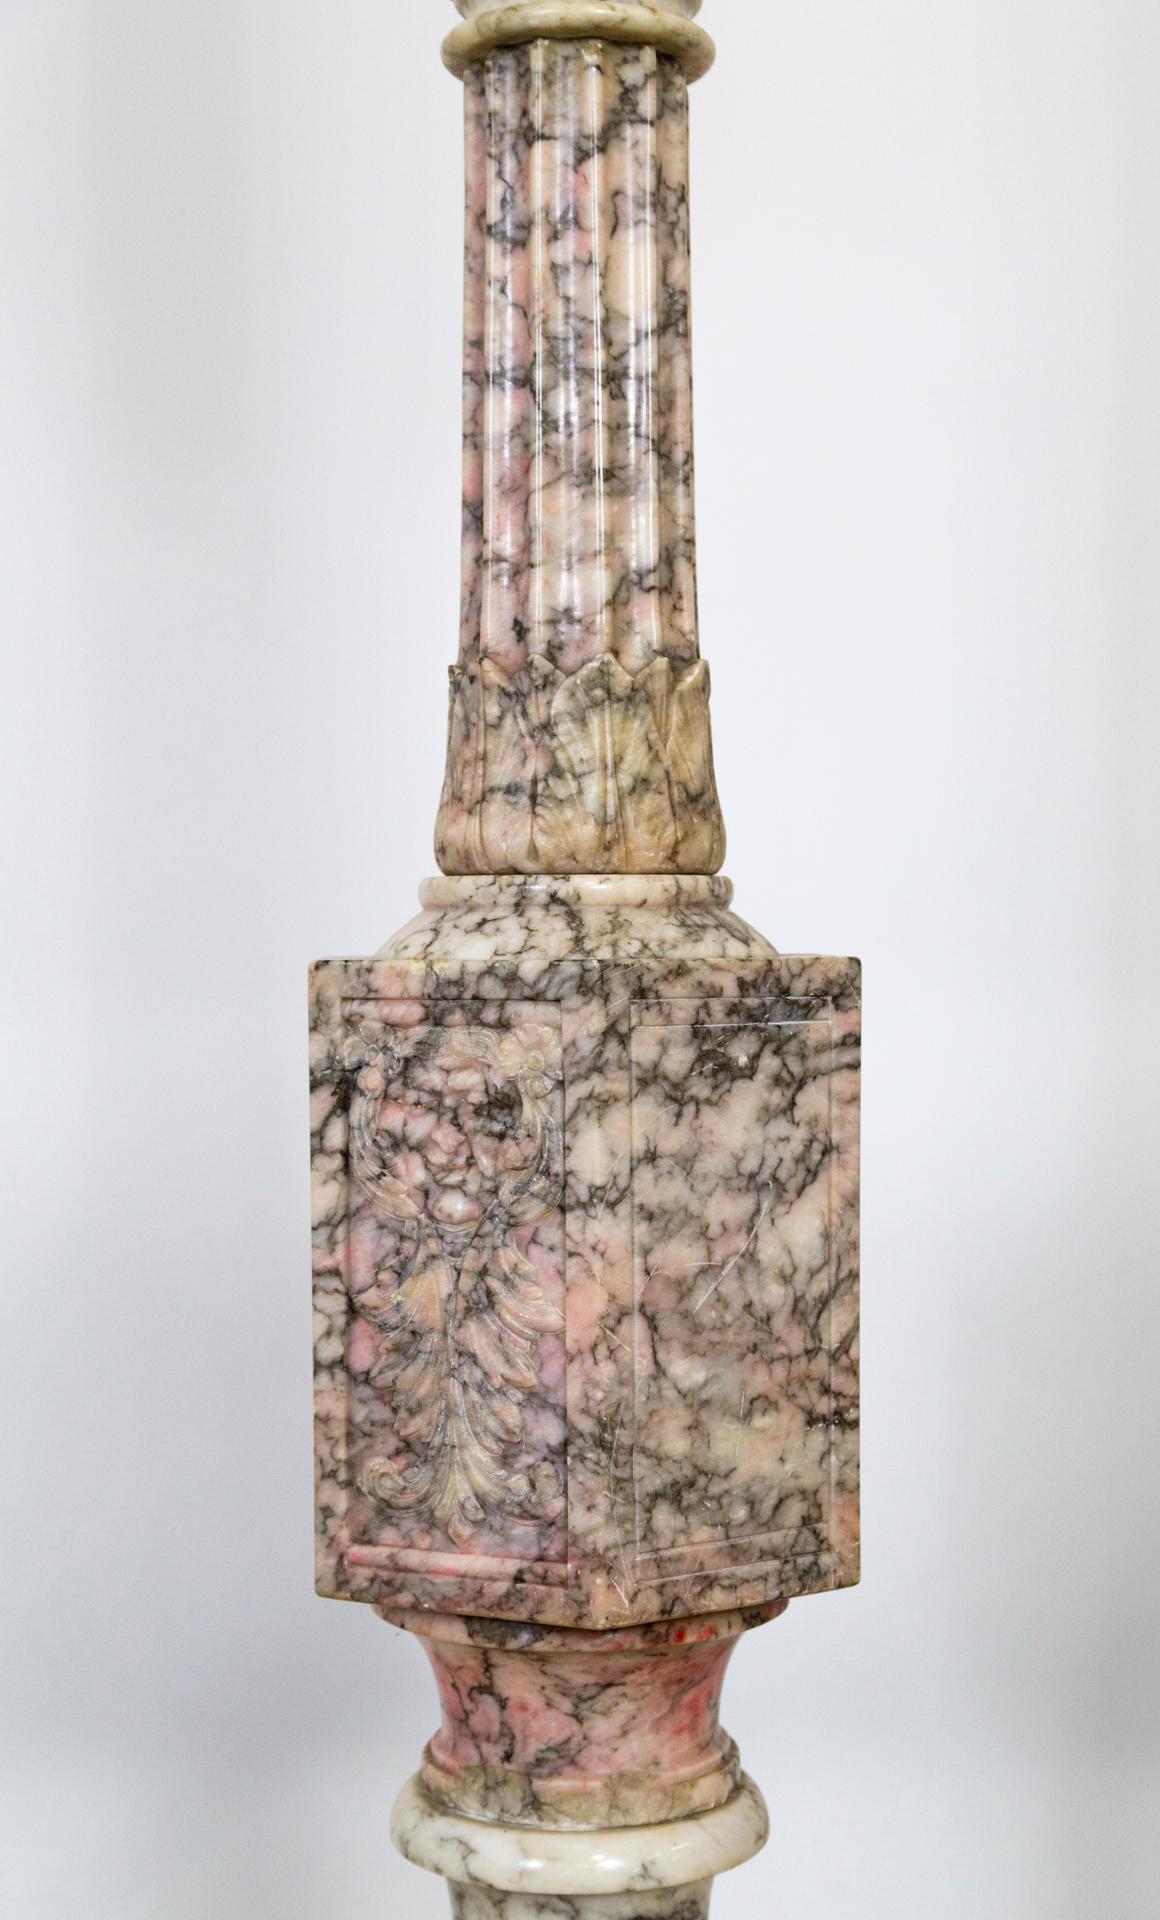 Alabaster and Pincanna marble floor lamp made in the early 20th century; hand carved green key motif and faces sculpted under the fluted column above the base. Some areas are rich pink. Beautifully veined and variegated with stone. Newly rewired,